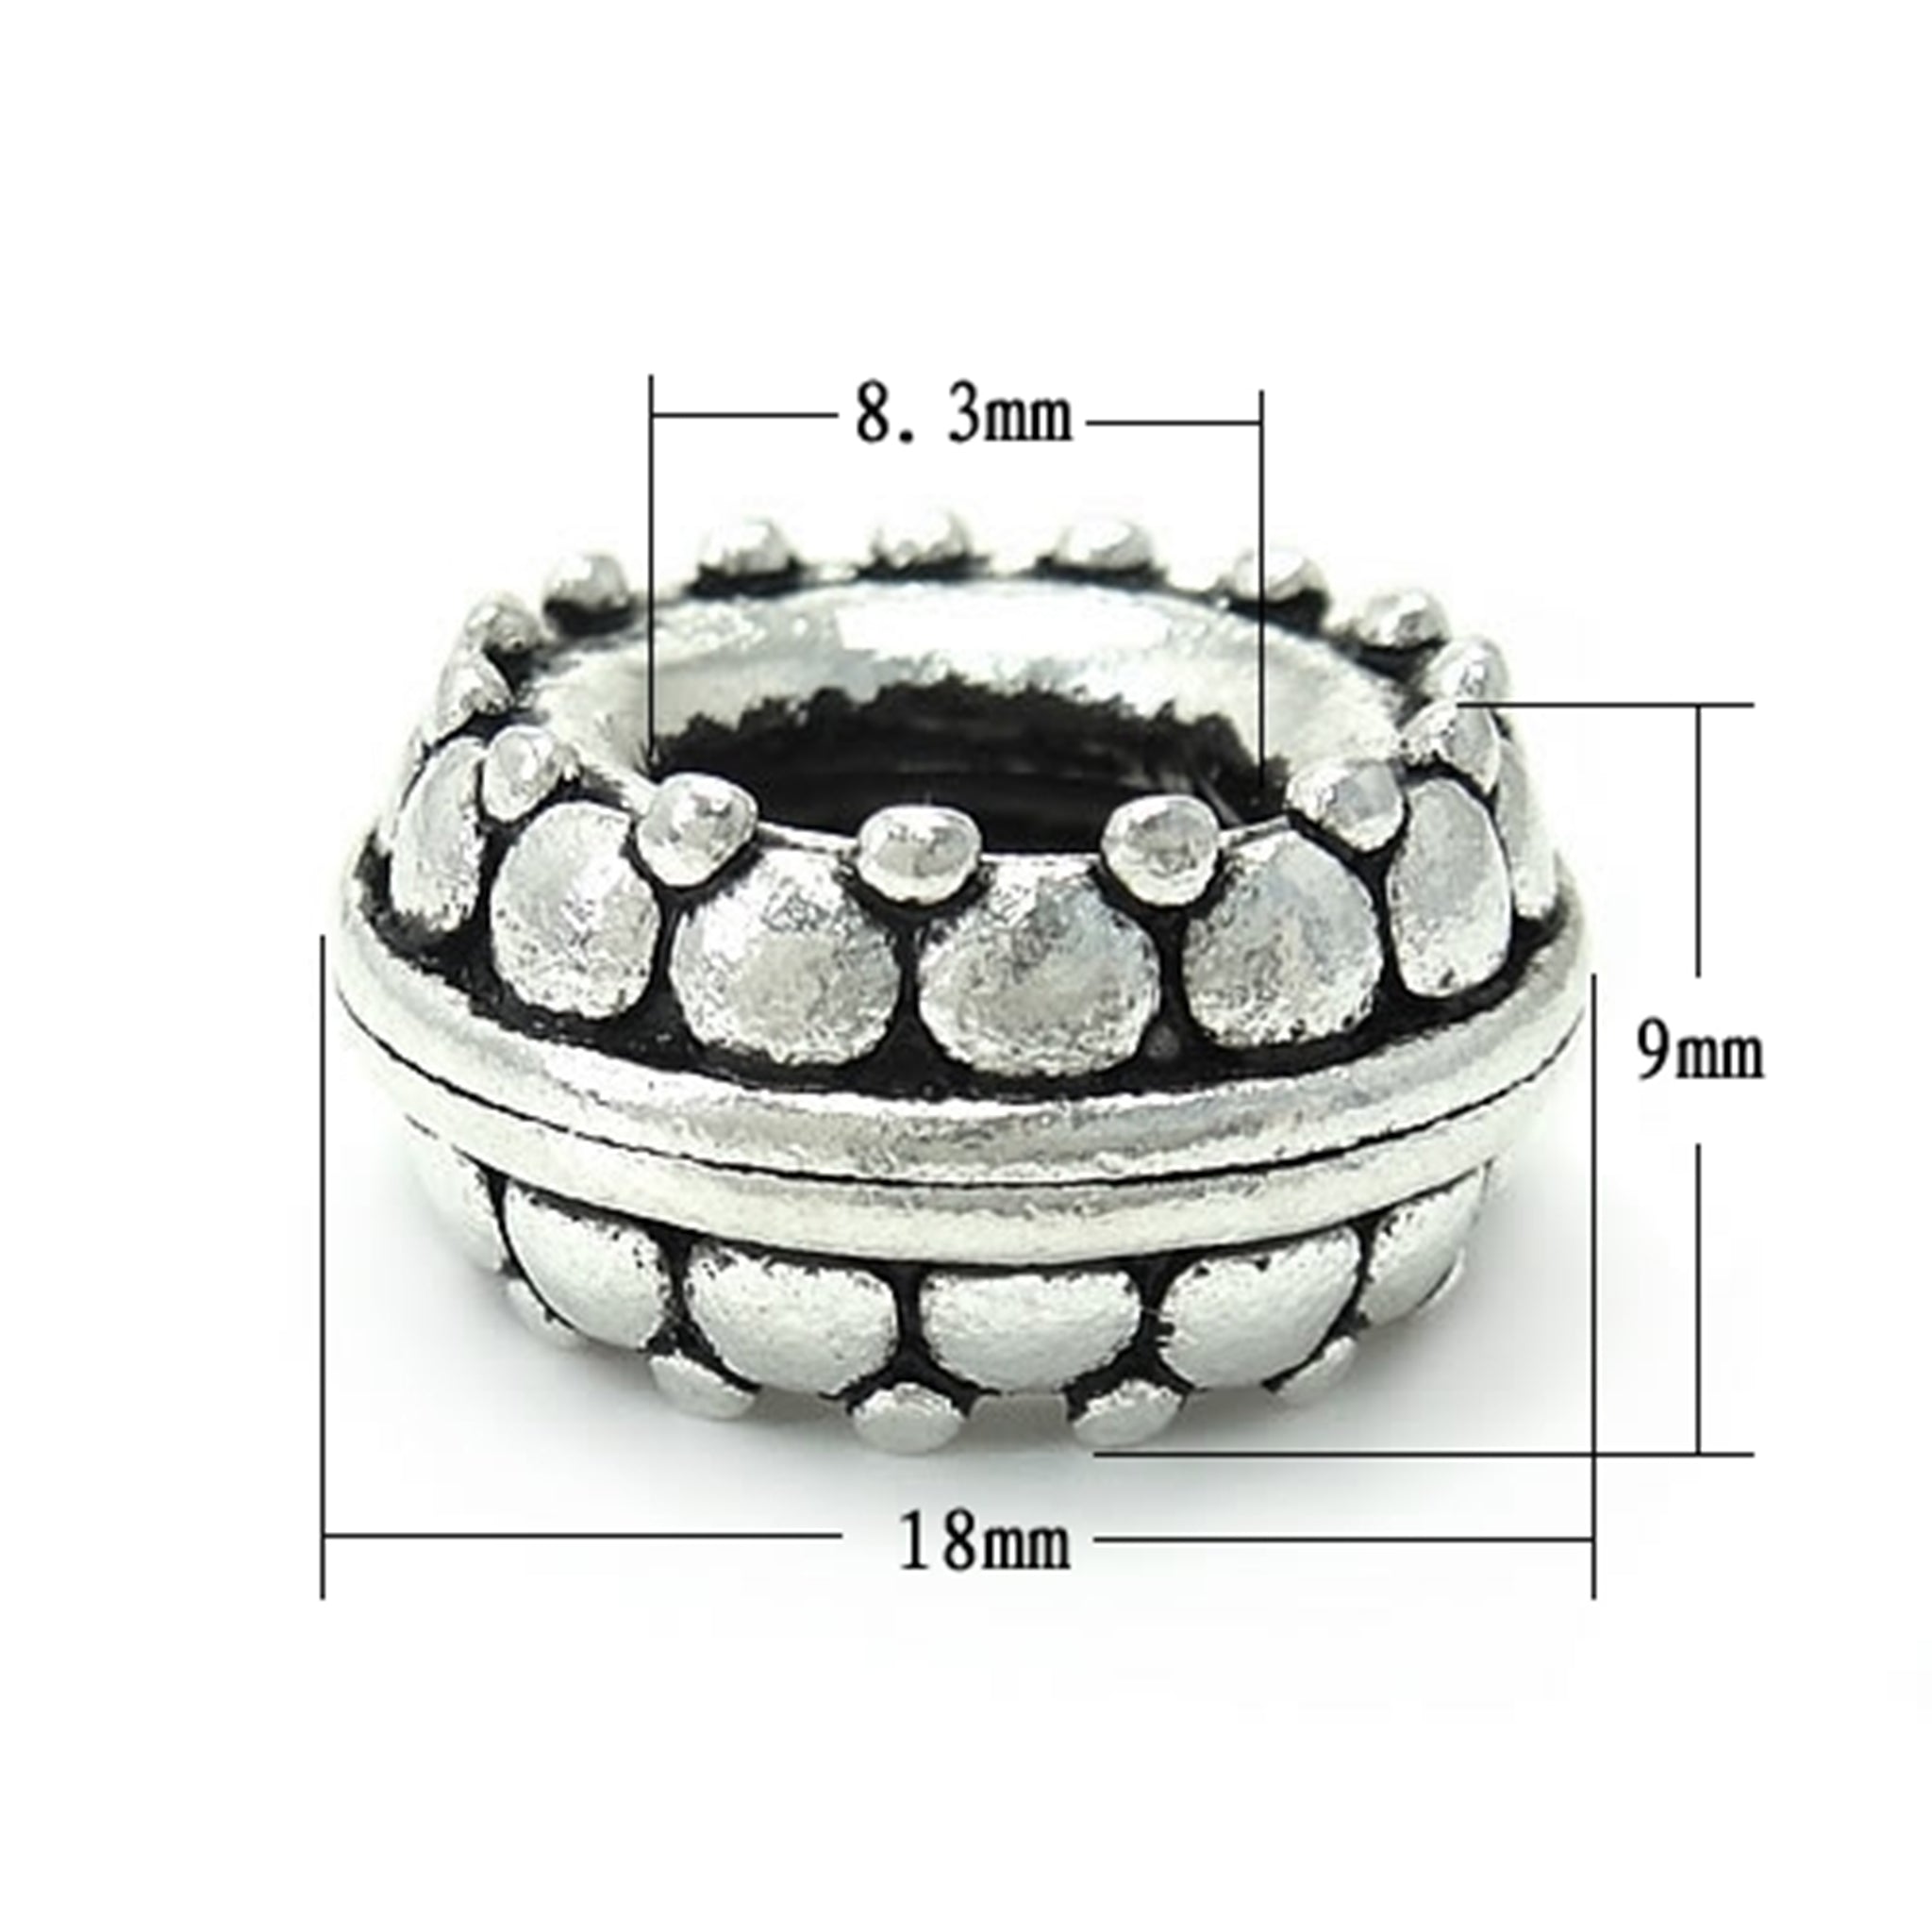 Circle Rondelle Spacer Bead in Antique Sterling Silver 17.3x8.8mm